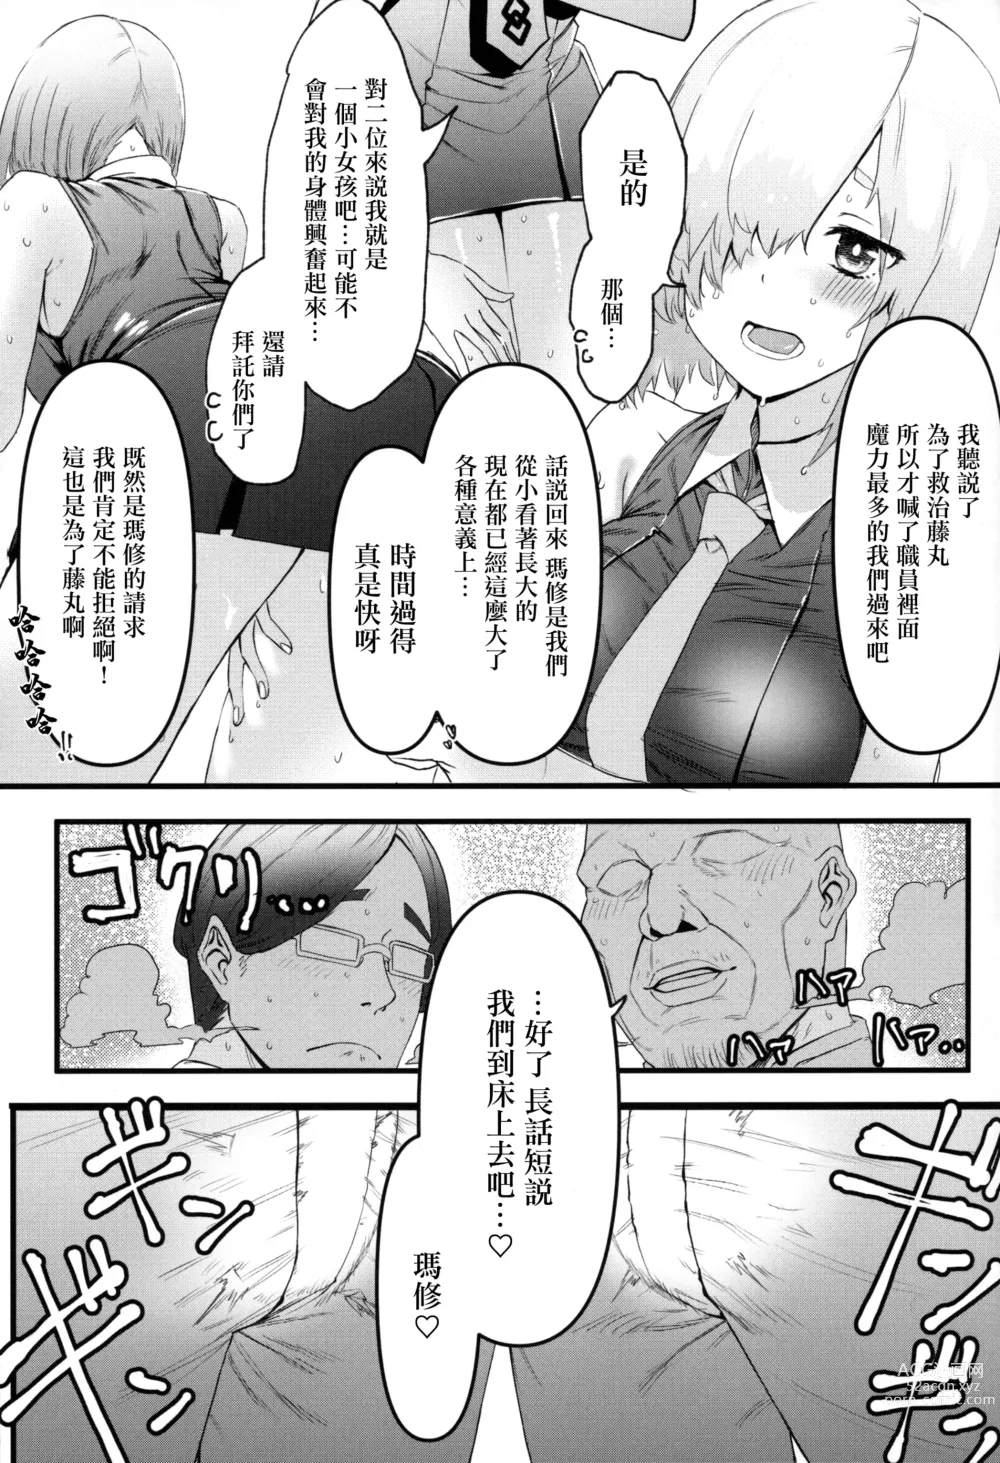 Page 8 of doujinshi 為了前輩NTR瑪修!